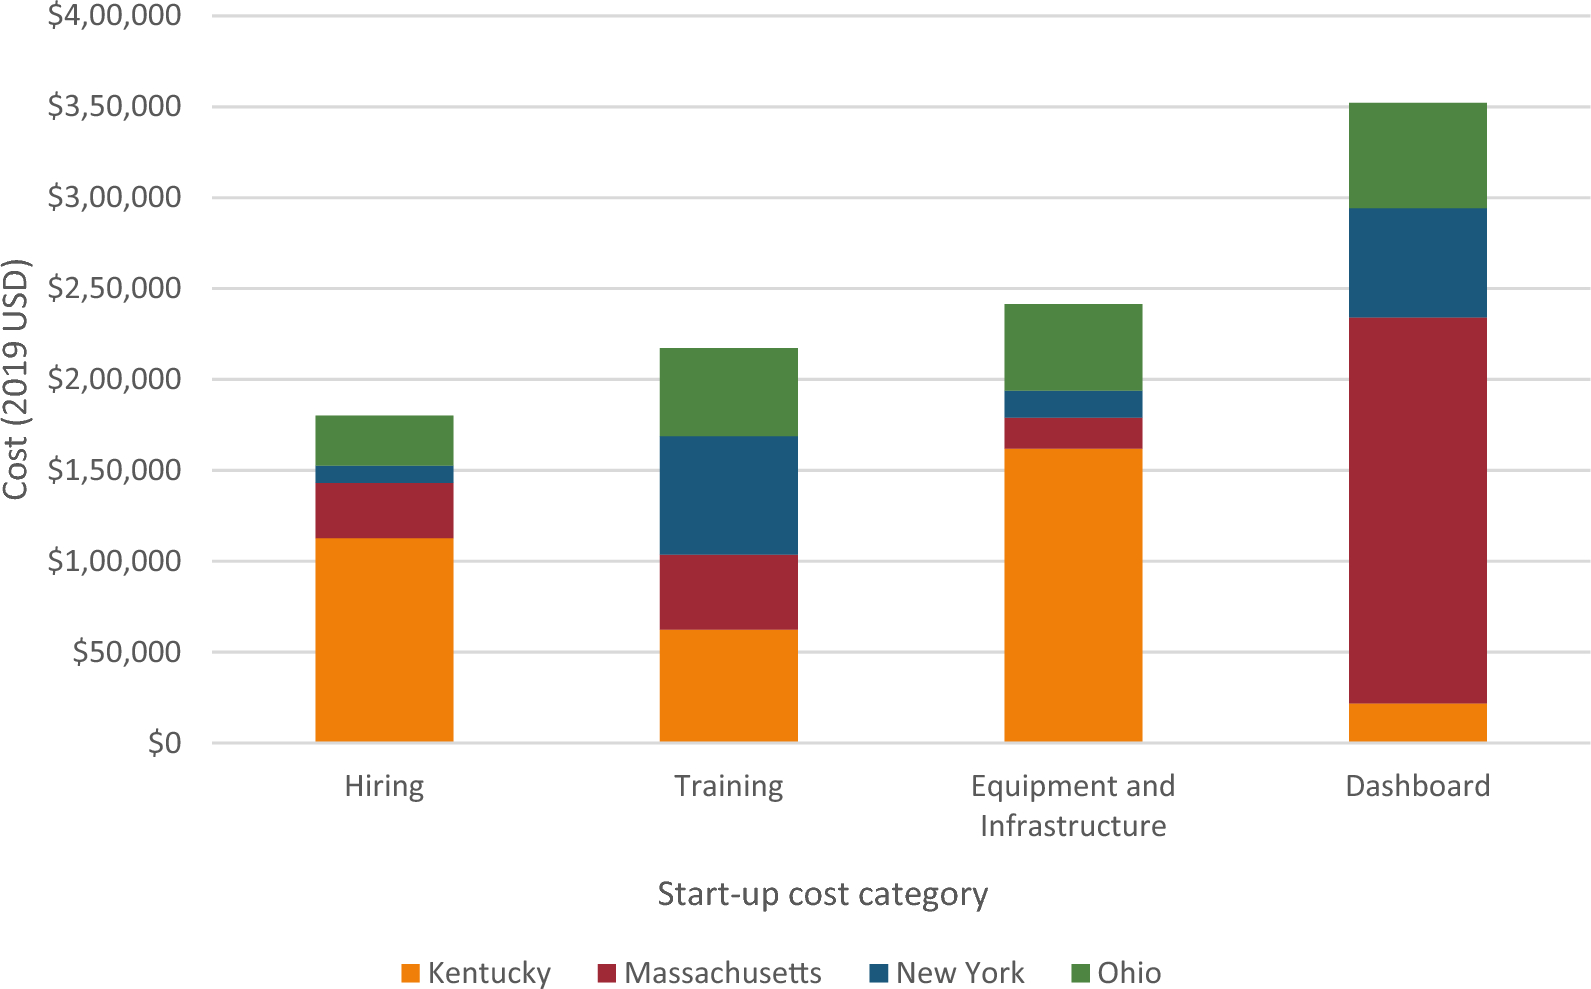 Cost of start-up activities to implement a community-level opioid overdose reduction intervention in the HEALing Communities Study